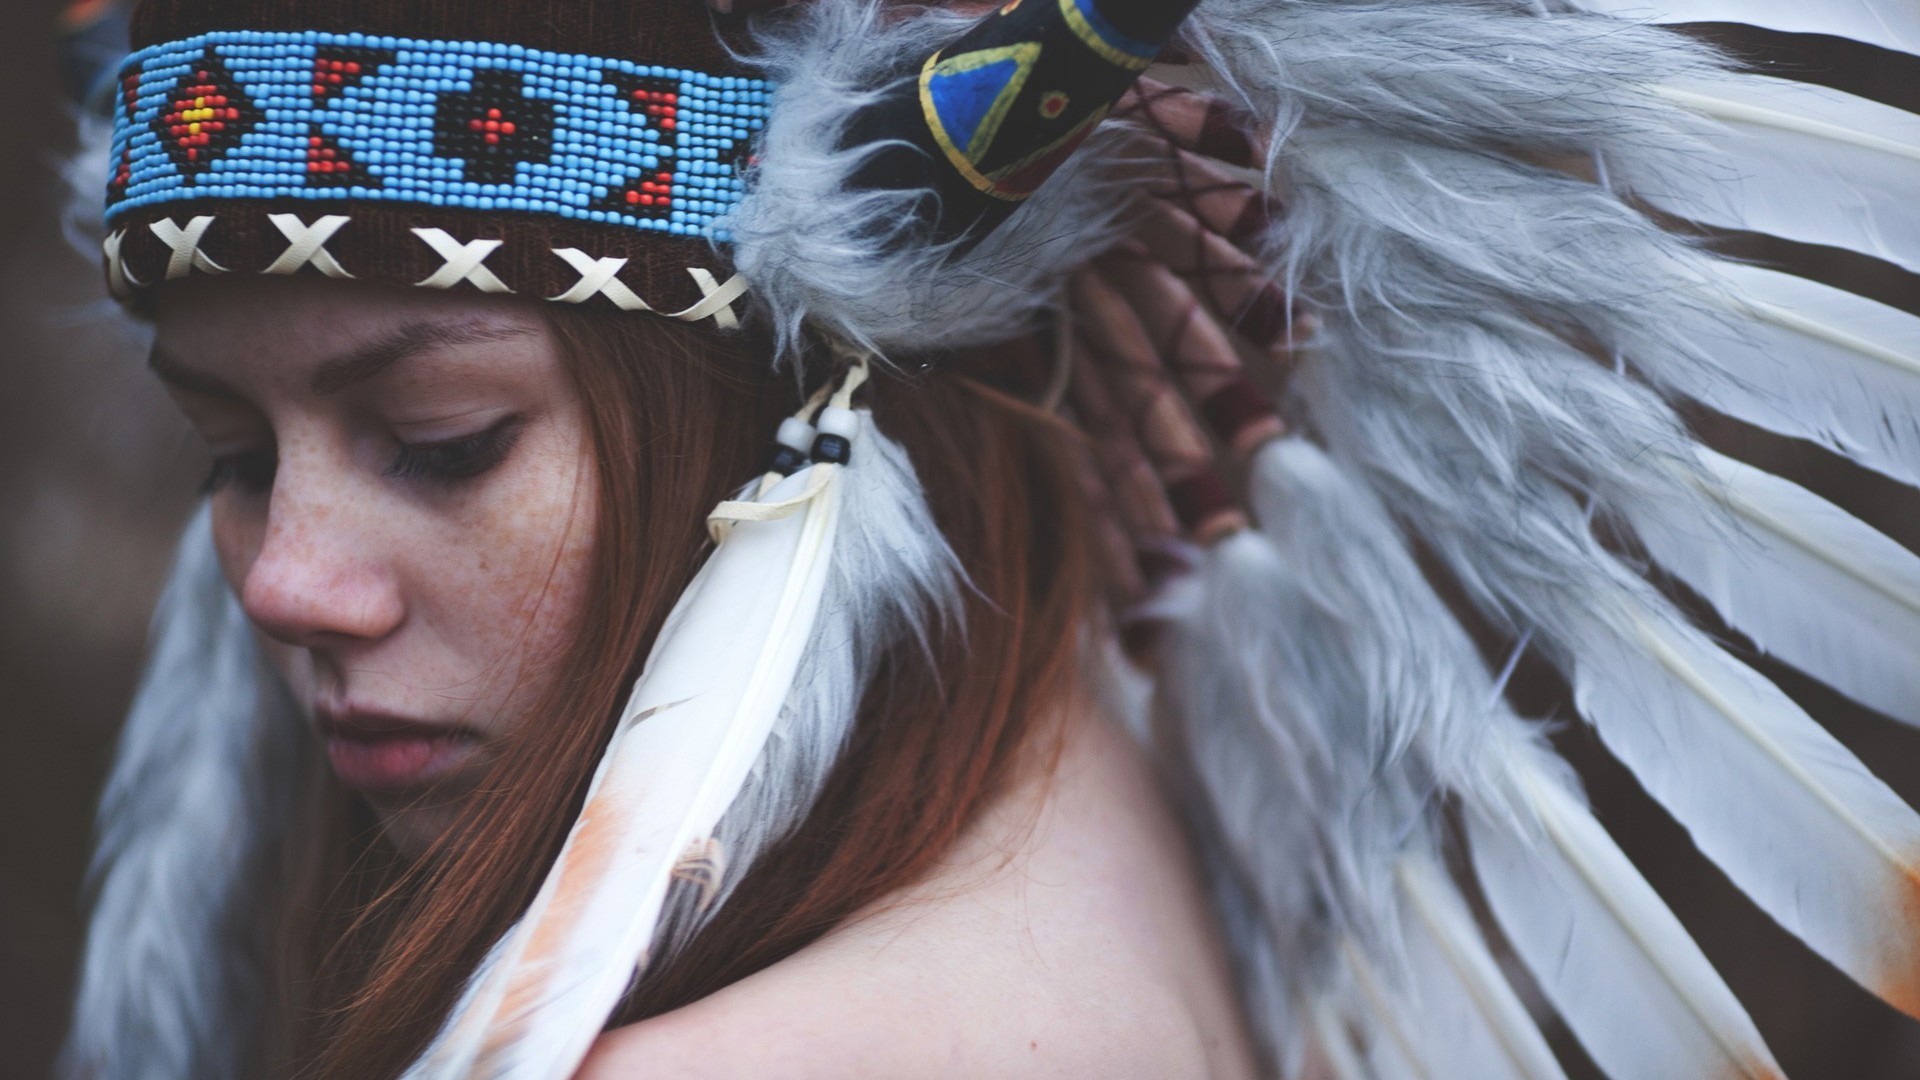 People 1920x1080 women model redhead long hair face feathers freckles headdress Native American clothing